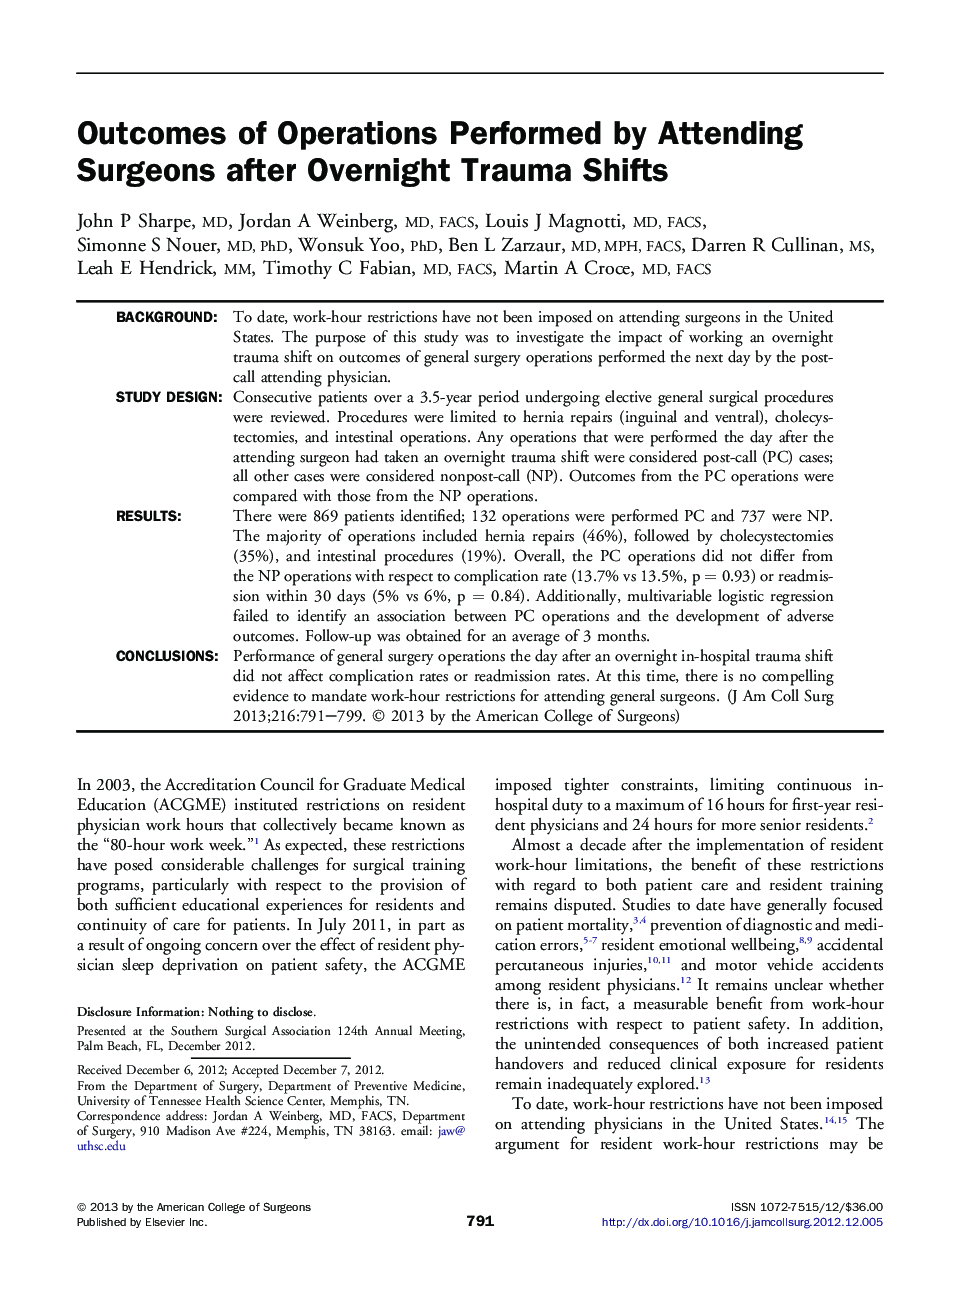 Outcomes of Operations Performed by Attending Surgeons after Overnight Trauma Shifts 